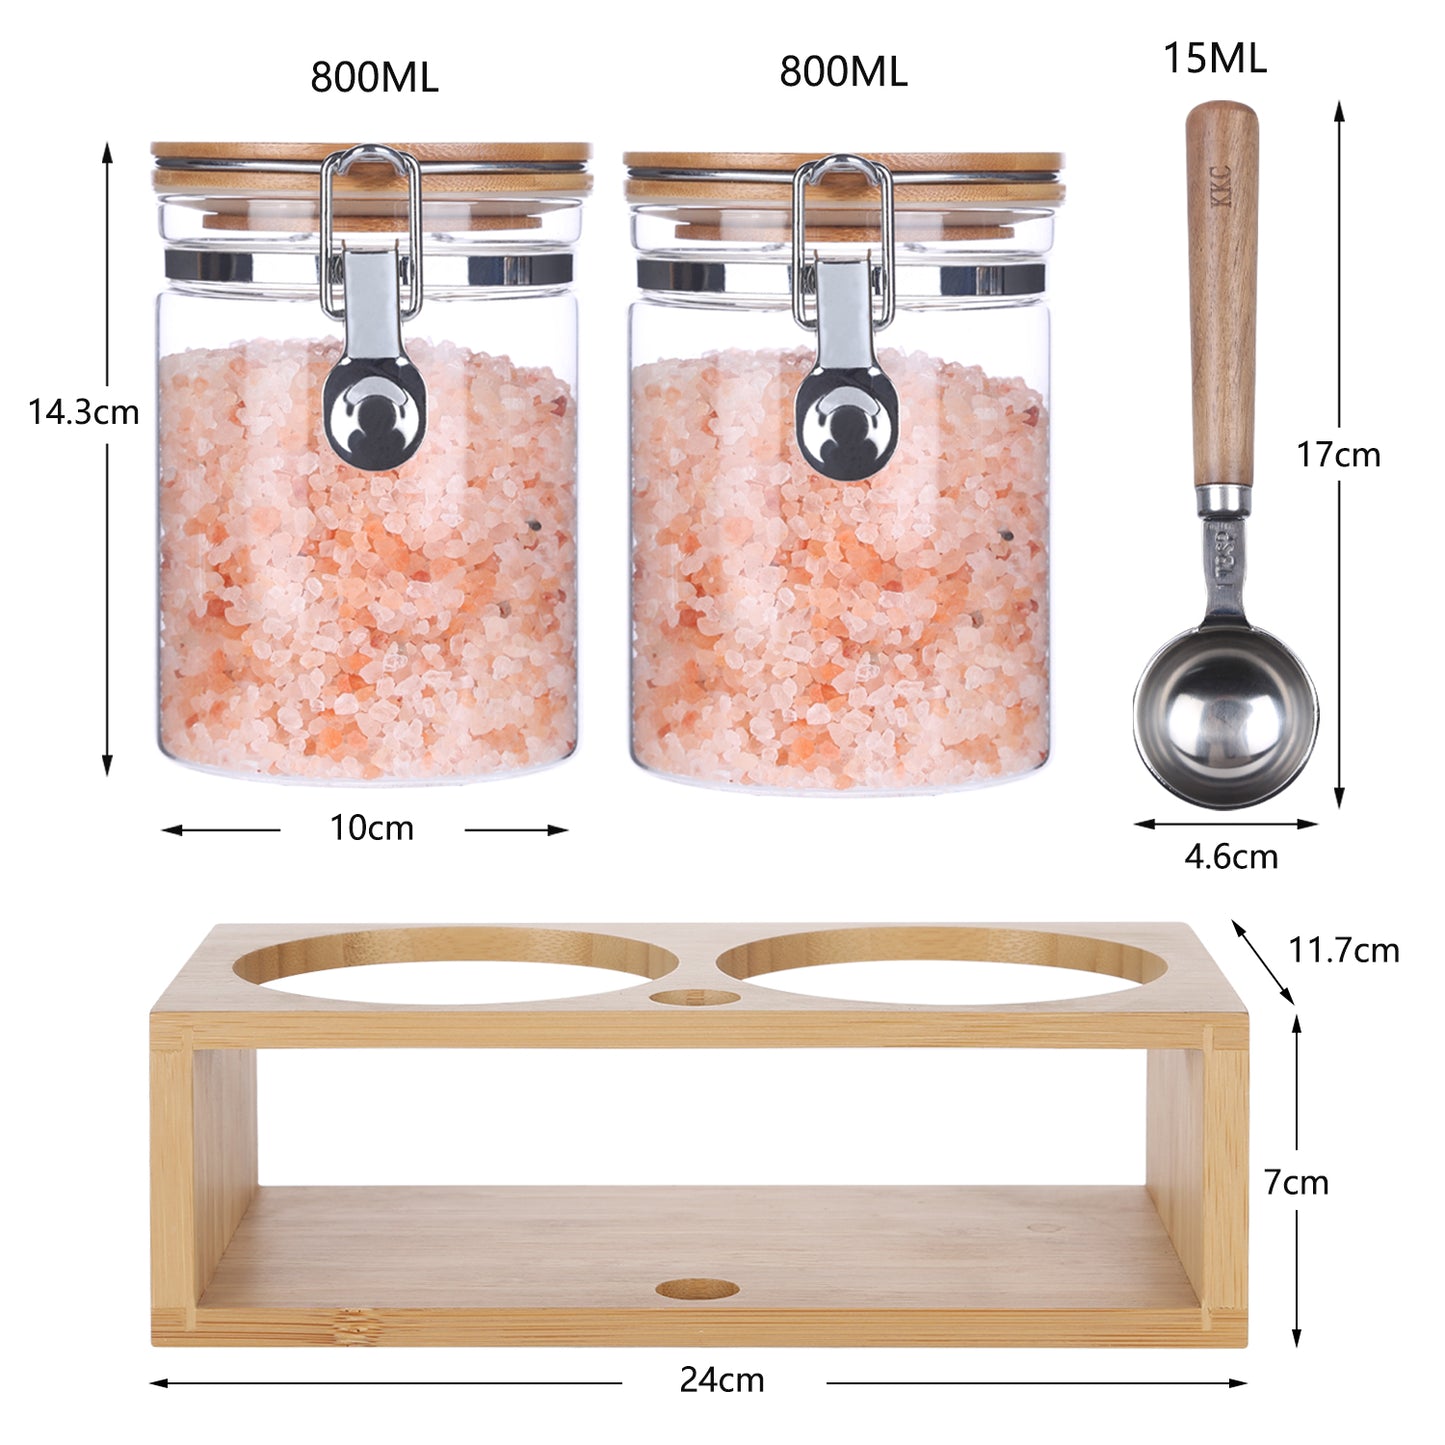 KKC HOME ACCENTS Borosilicate Glass Sugar Salt Storage Containers with Airtight Locking Clamp Lids,Sealed Glass Jar Canisters for Brown Sugar,Loose Tea,Coffee,27 Fluid-oz